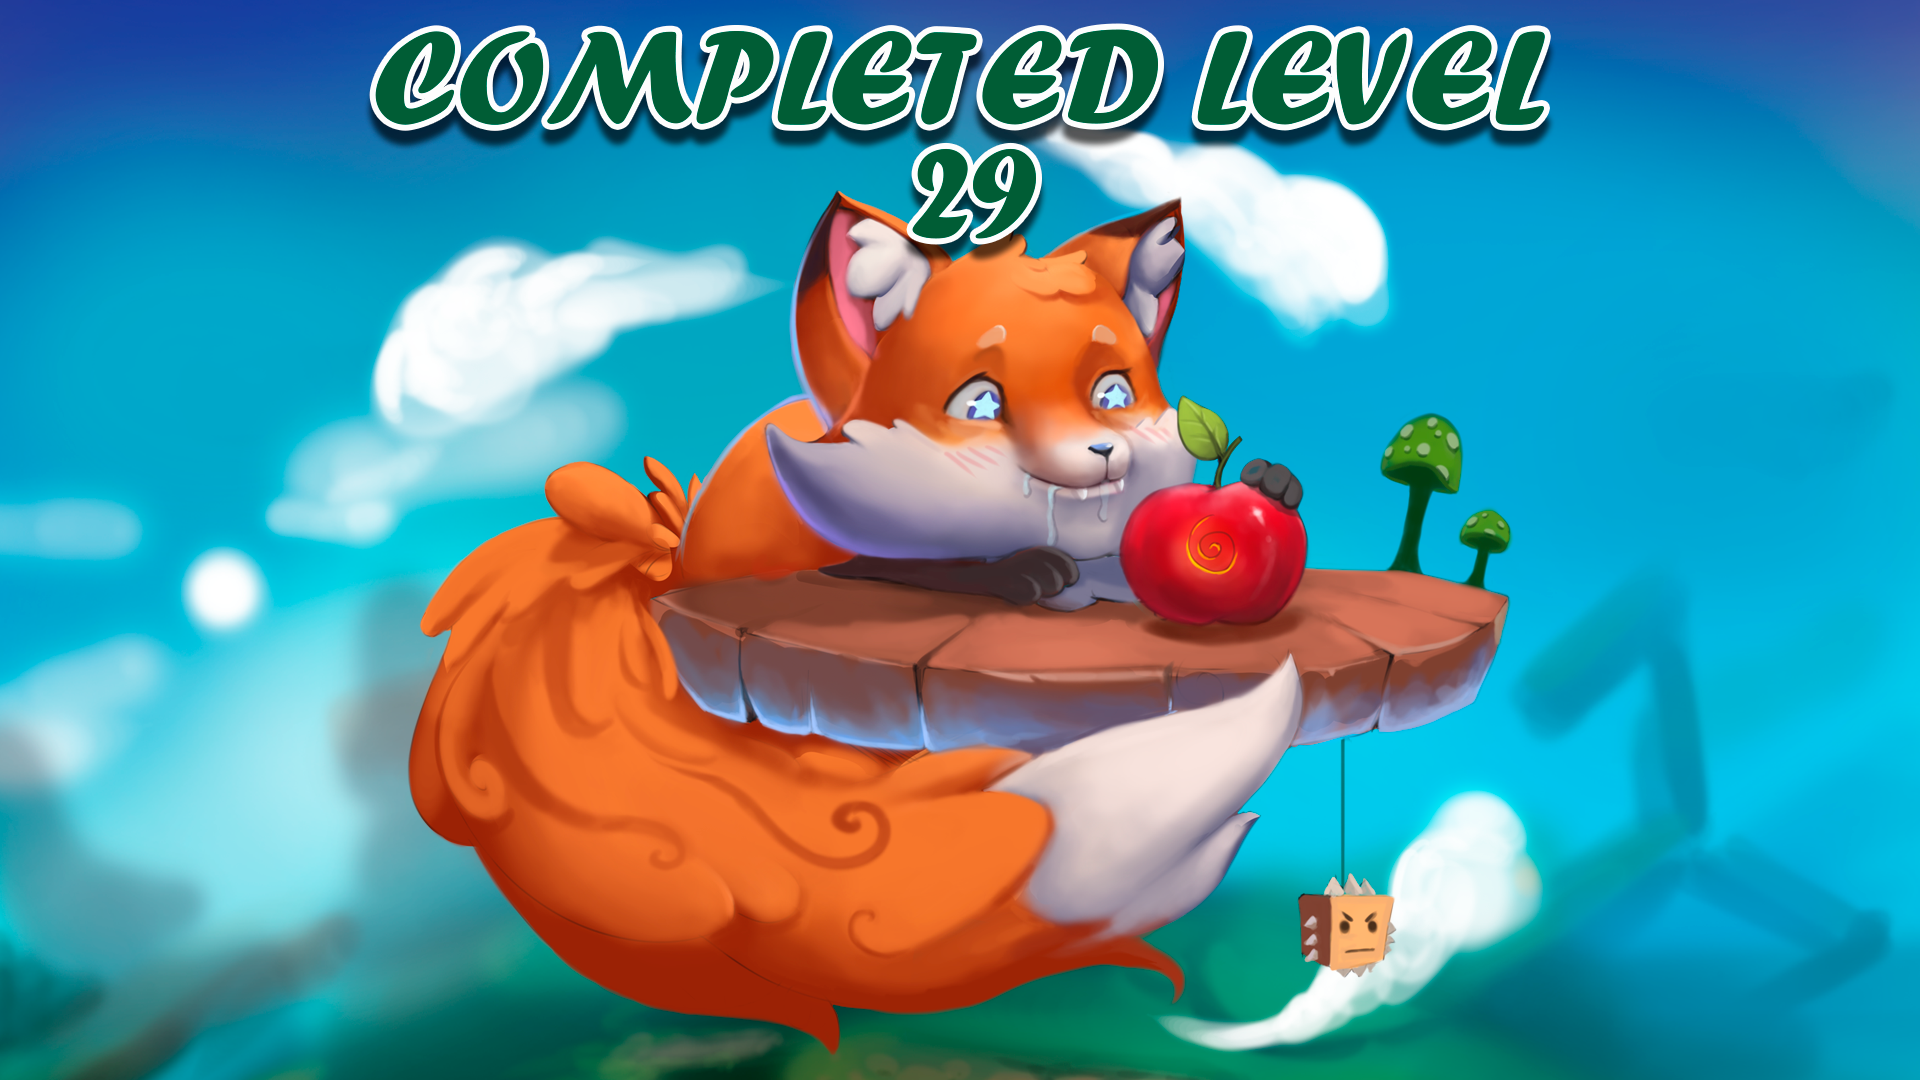 29 levels completed